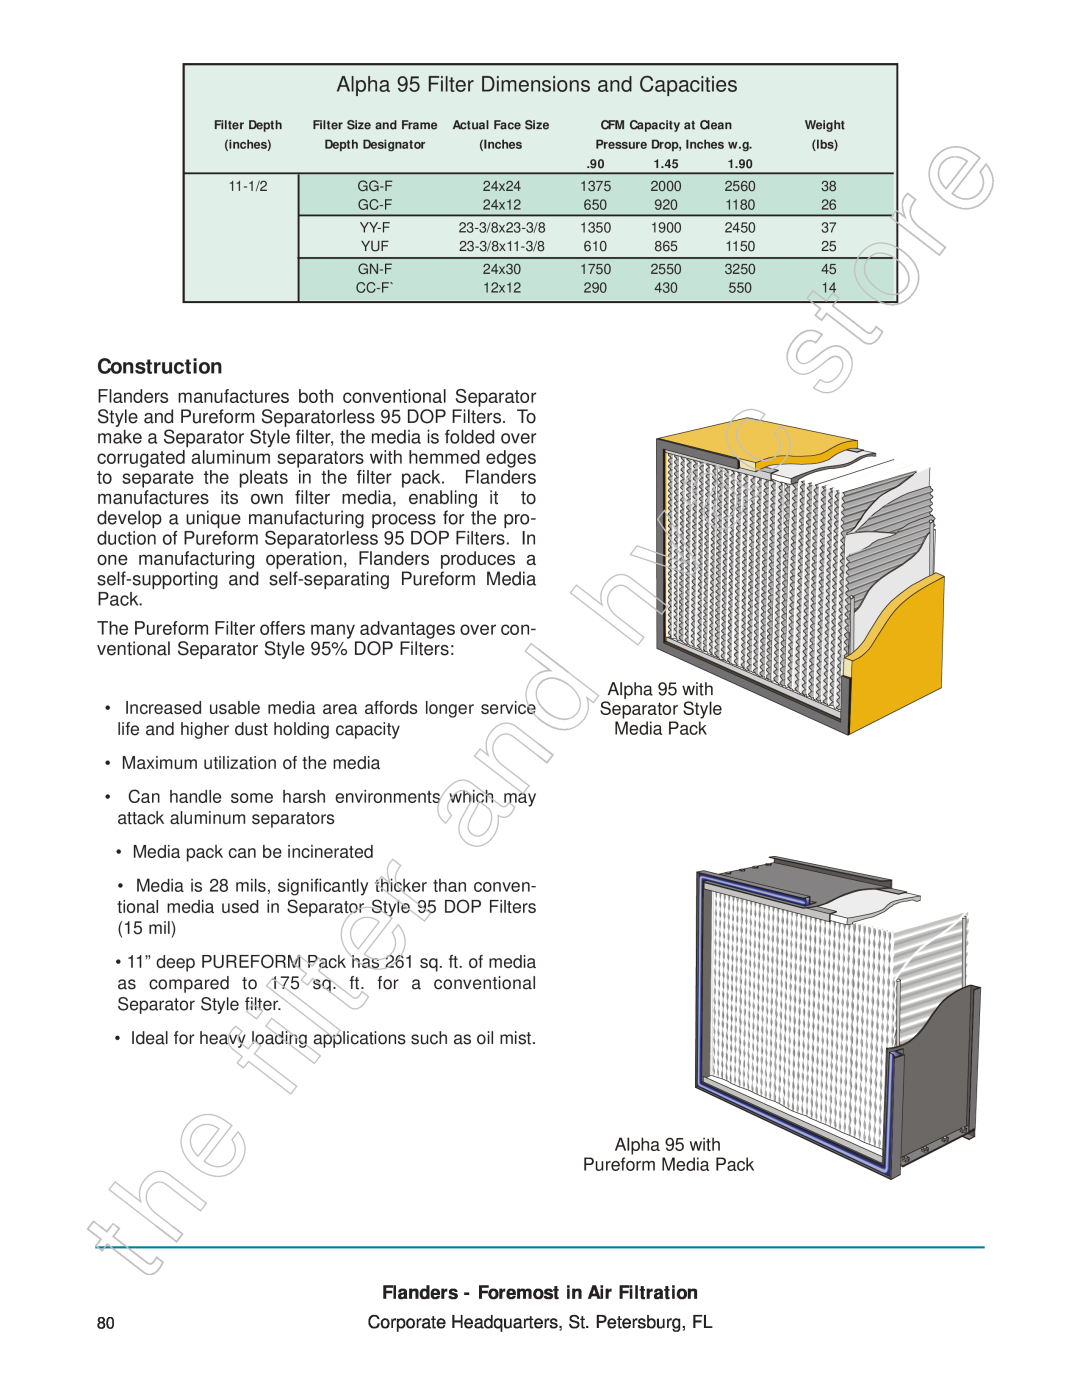 Honeywell 11255 manual Construction, Alpha 95 Filter Dimensions and Capacities, Flanders - Foremost in Air Filtration 